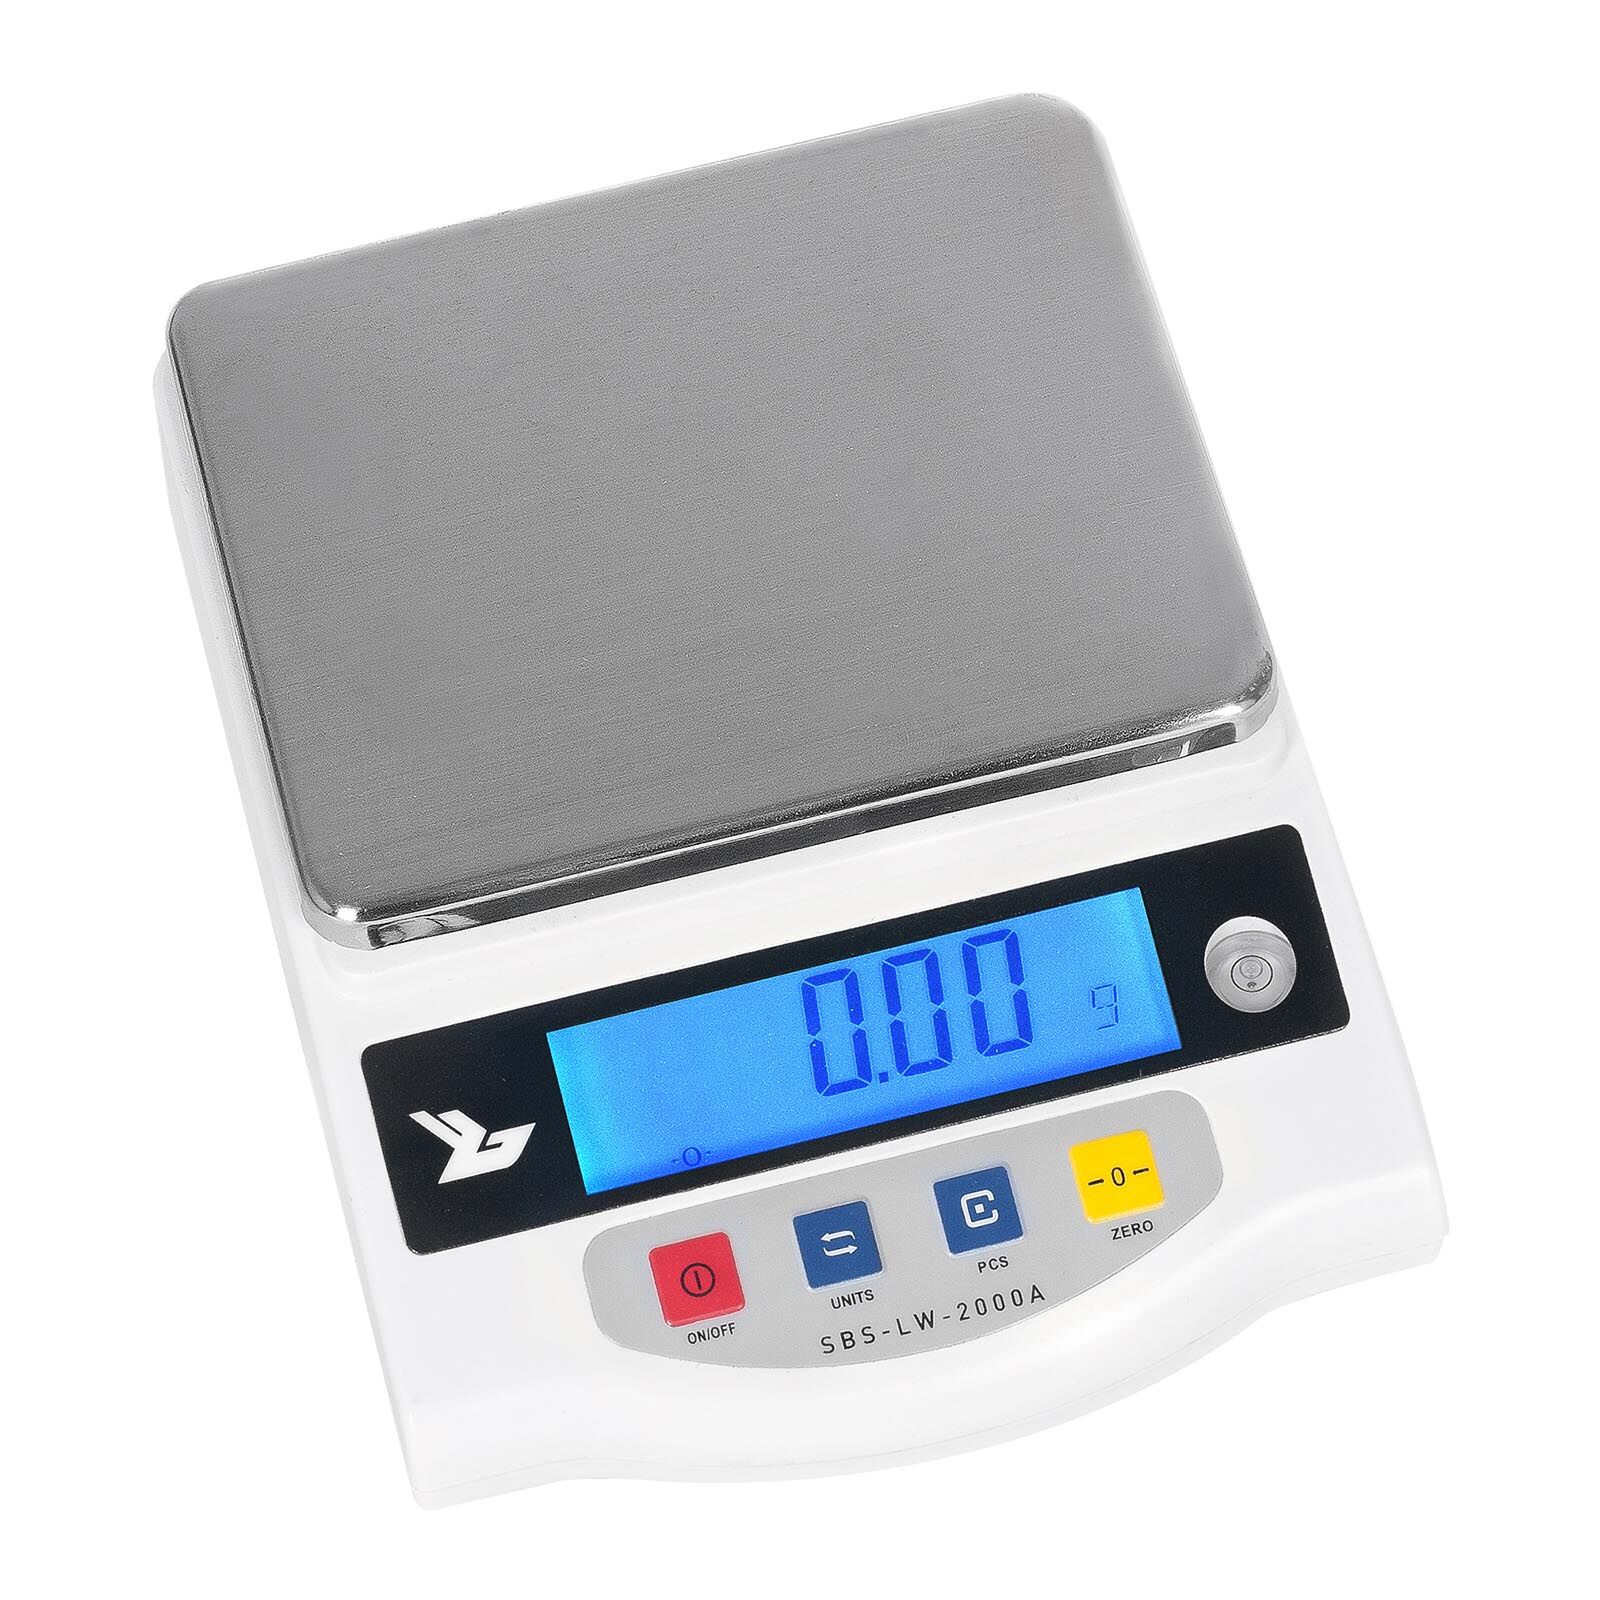 Steinberg Systems Precision Scale- 2,000 g / 0.01 g SBS-LW-2000A